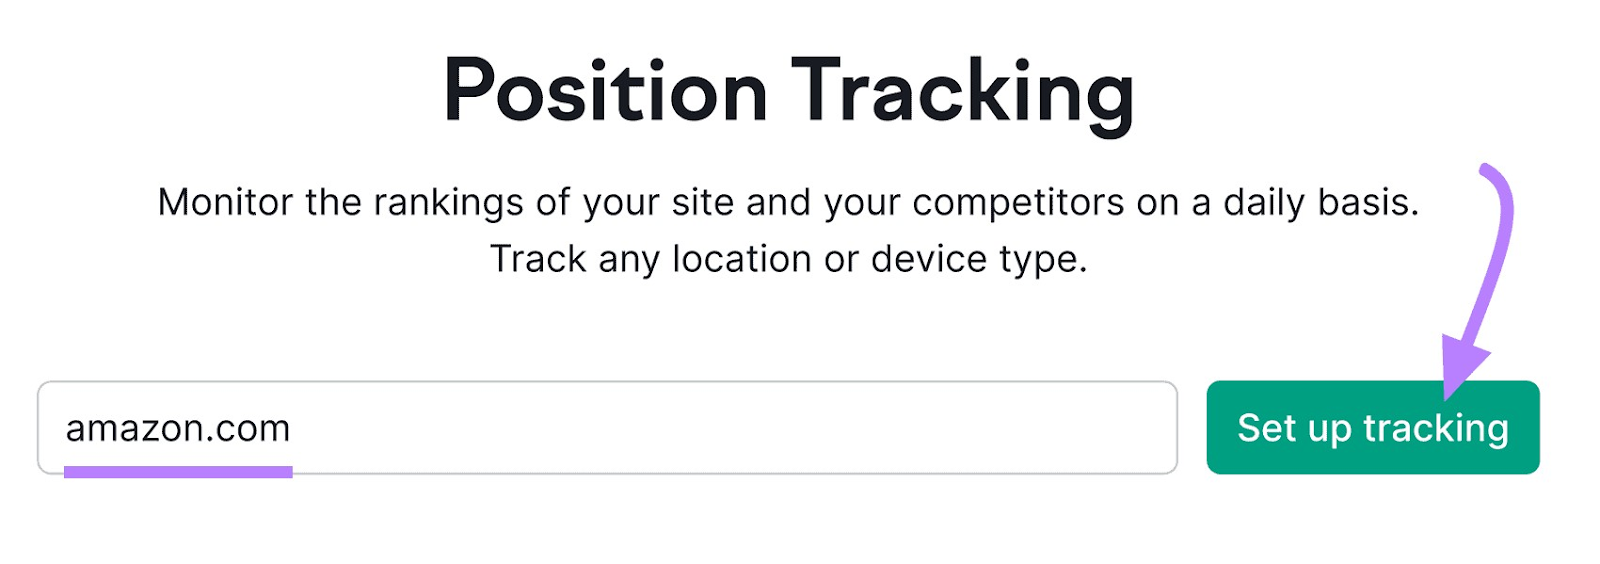 "amazon.com" entered into Position Tracking search bar